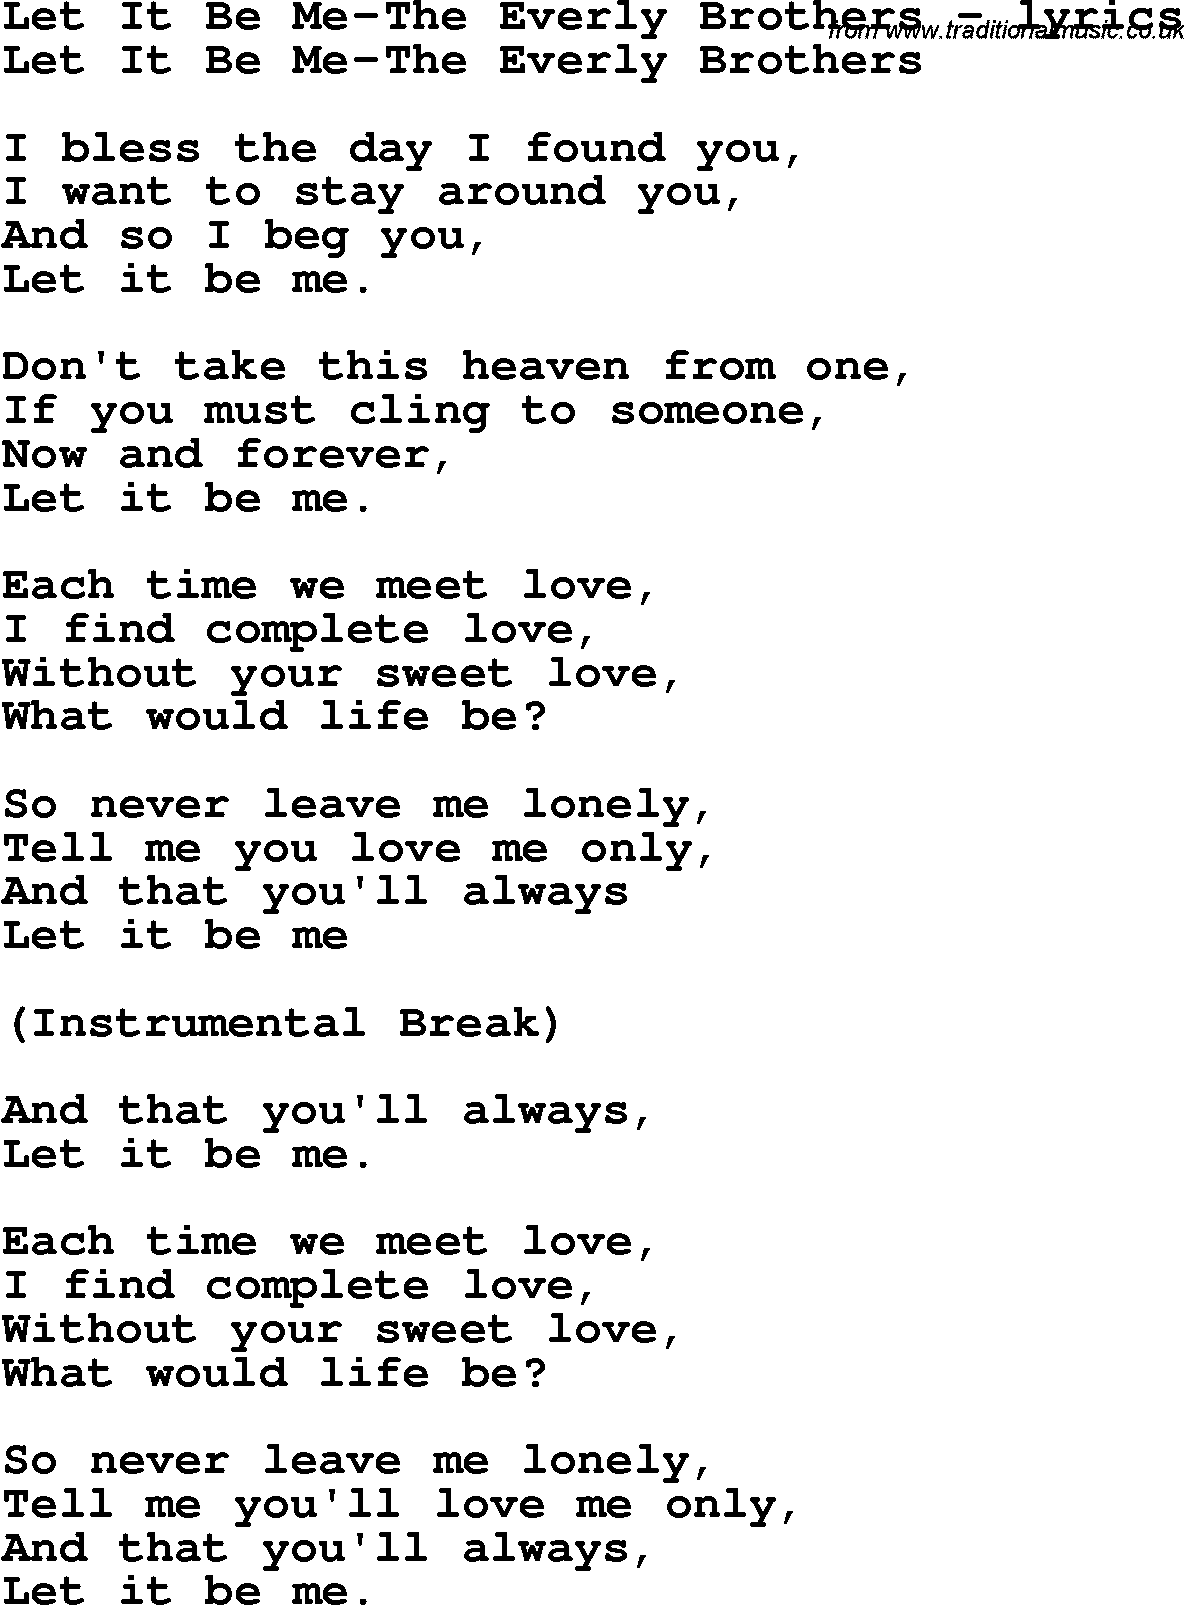 Love Song Lyrics for: Let It Be Me-The Everly Brothers